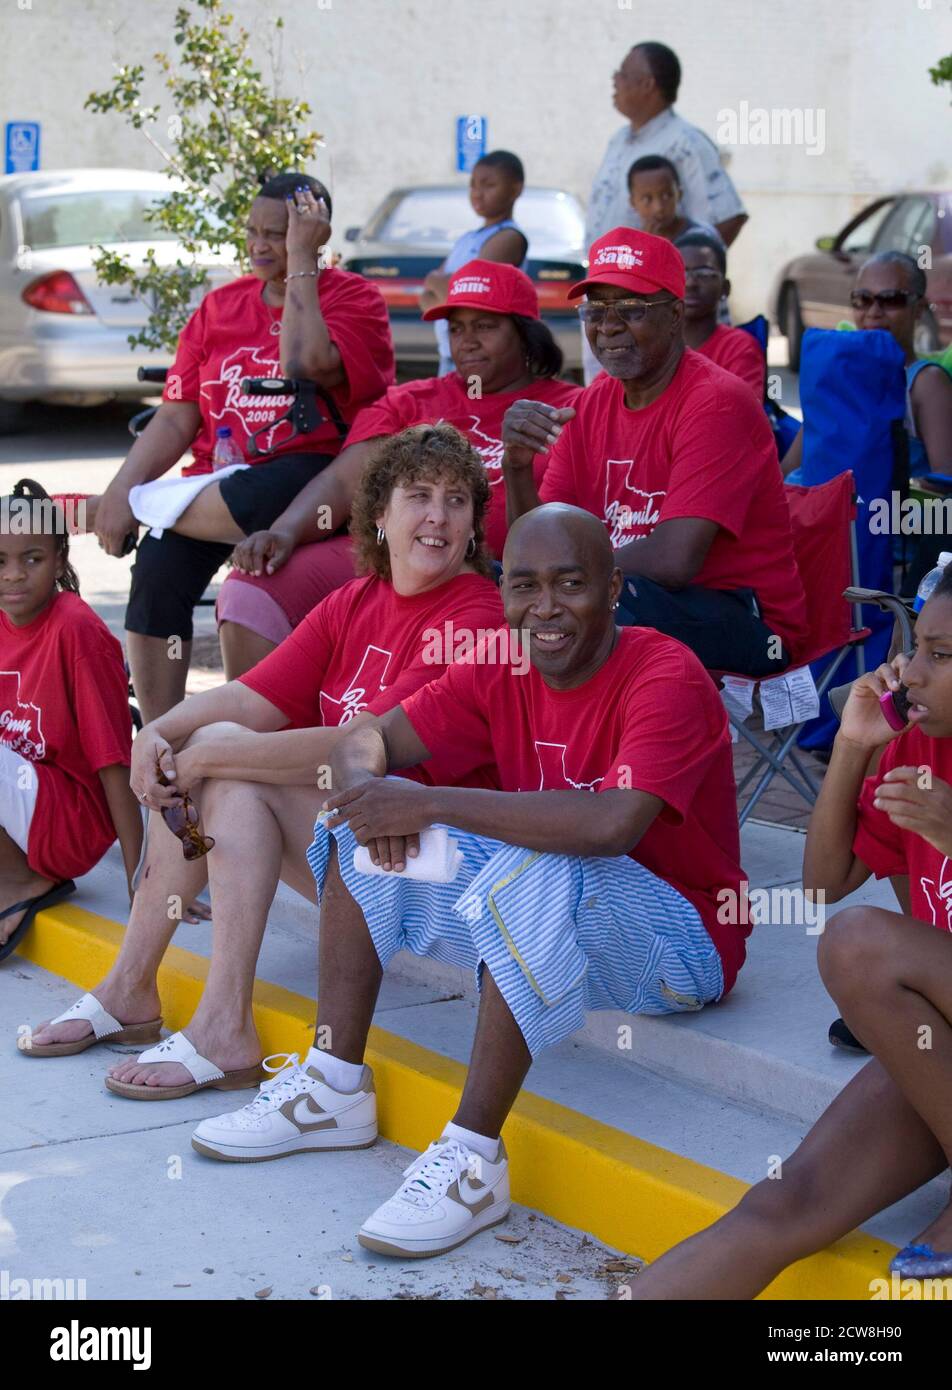 Bastrop, TX June 21, 2008: Parade-watchers at a Juneteenth celebration in the historically African-American town of Bastrop, outside Austin. Juneteenth celebrates the day (June 19, 1865) when Union soldiers landed in Galveston, TX announcing the end of slavery and the Civil War. ©Bob Daemmrich Stock Photo